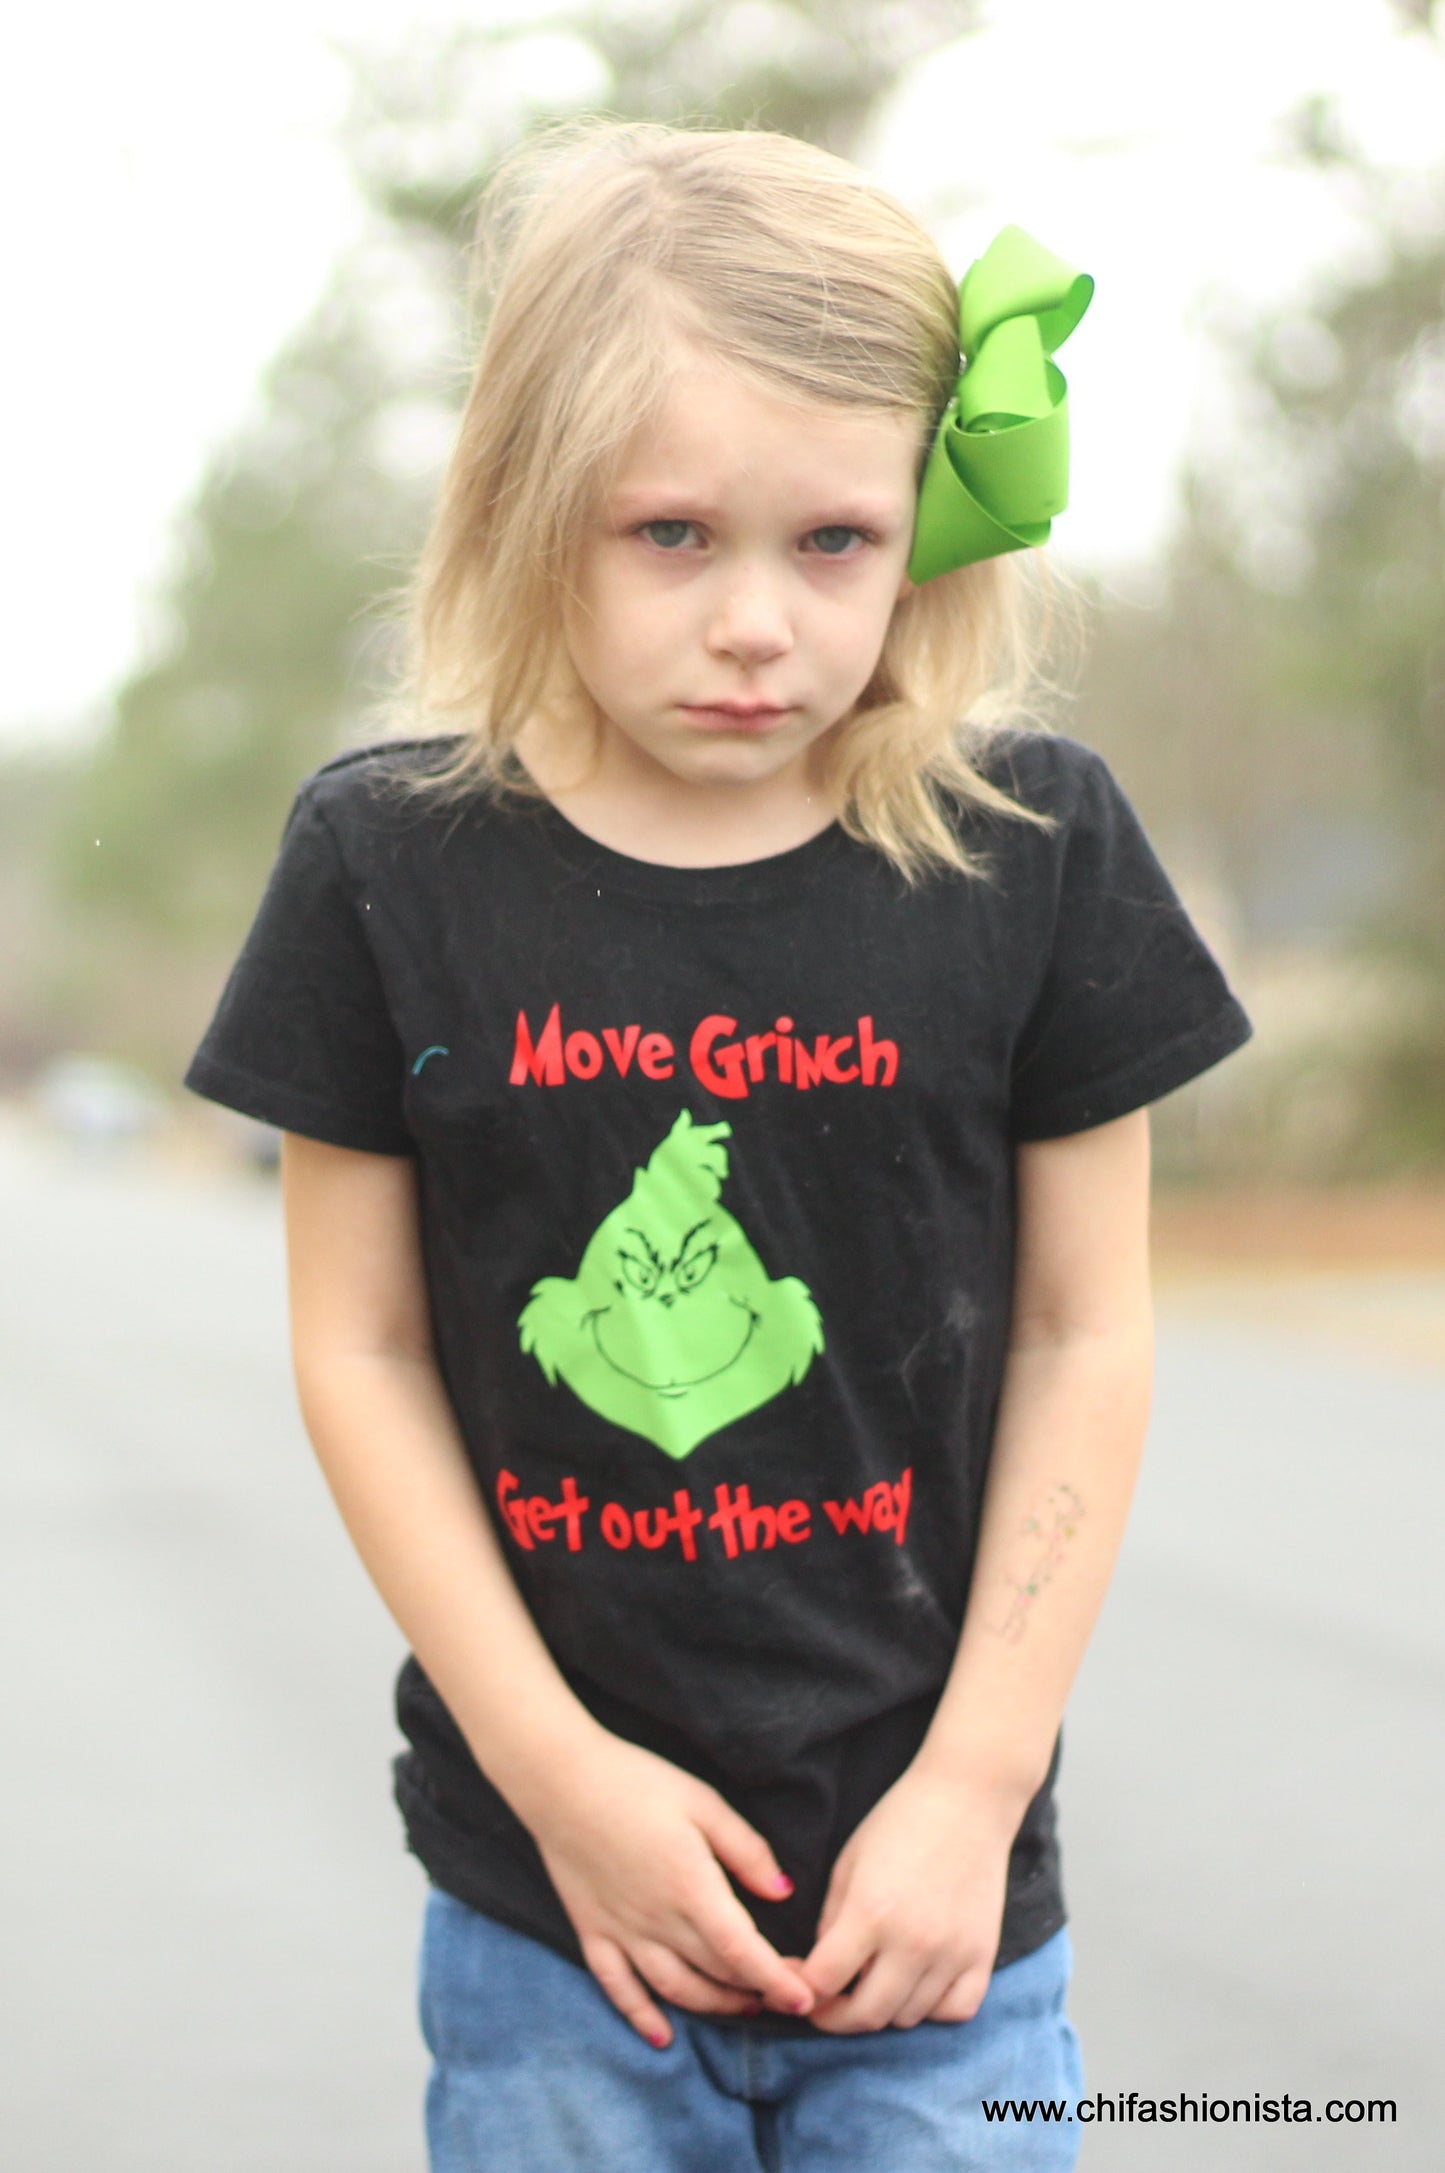 Move Grinch, Get out the way - Suess